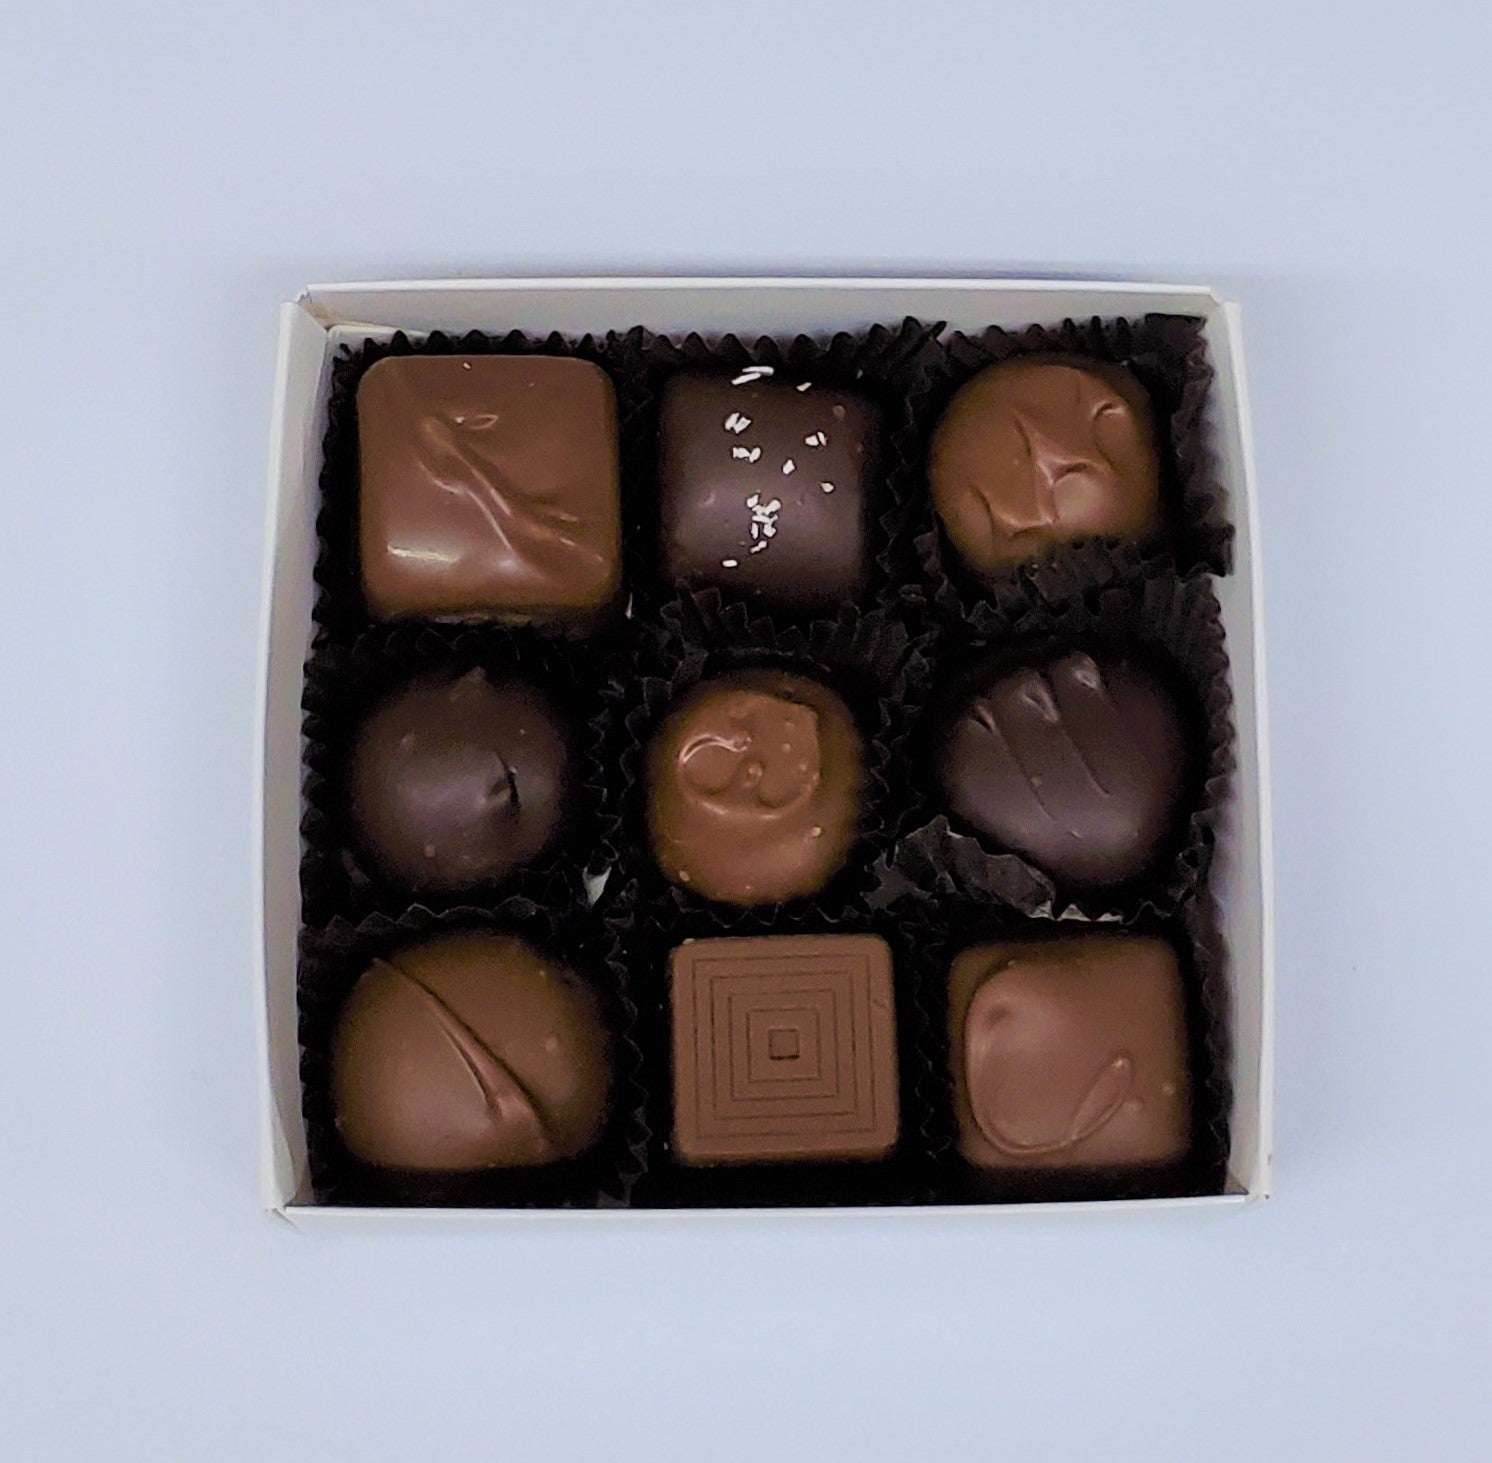 9 assorted creams, caramels and meltaways of our most popular hand made chocolates in a decorative box